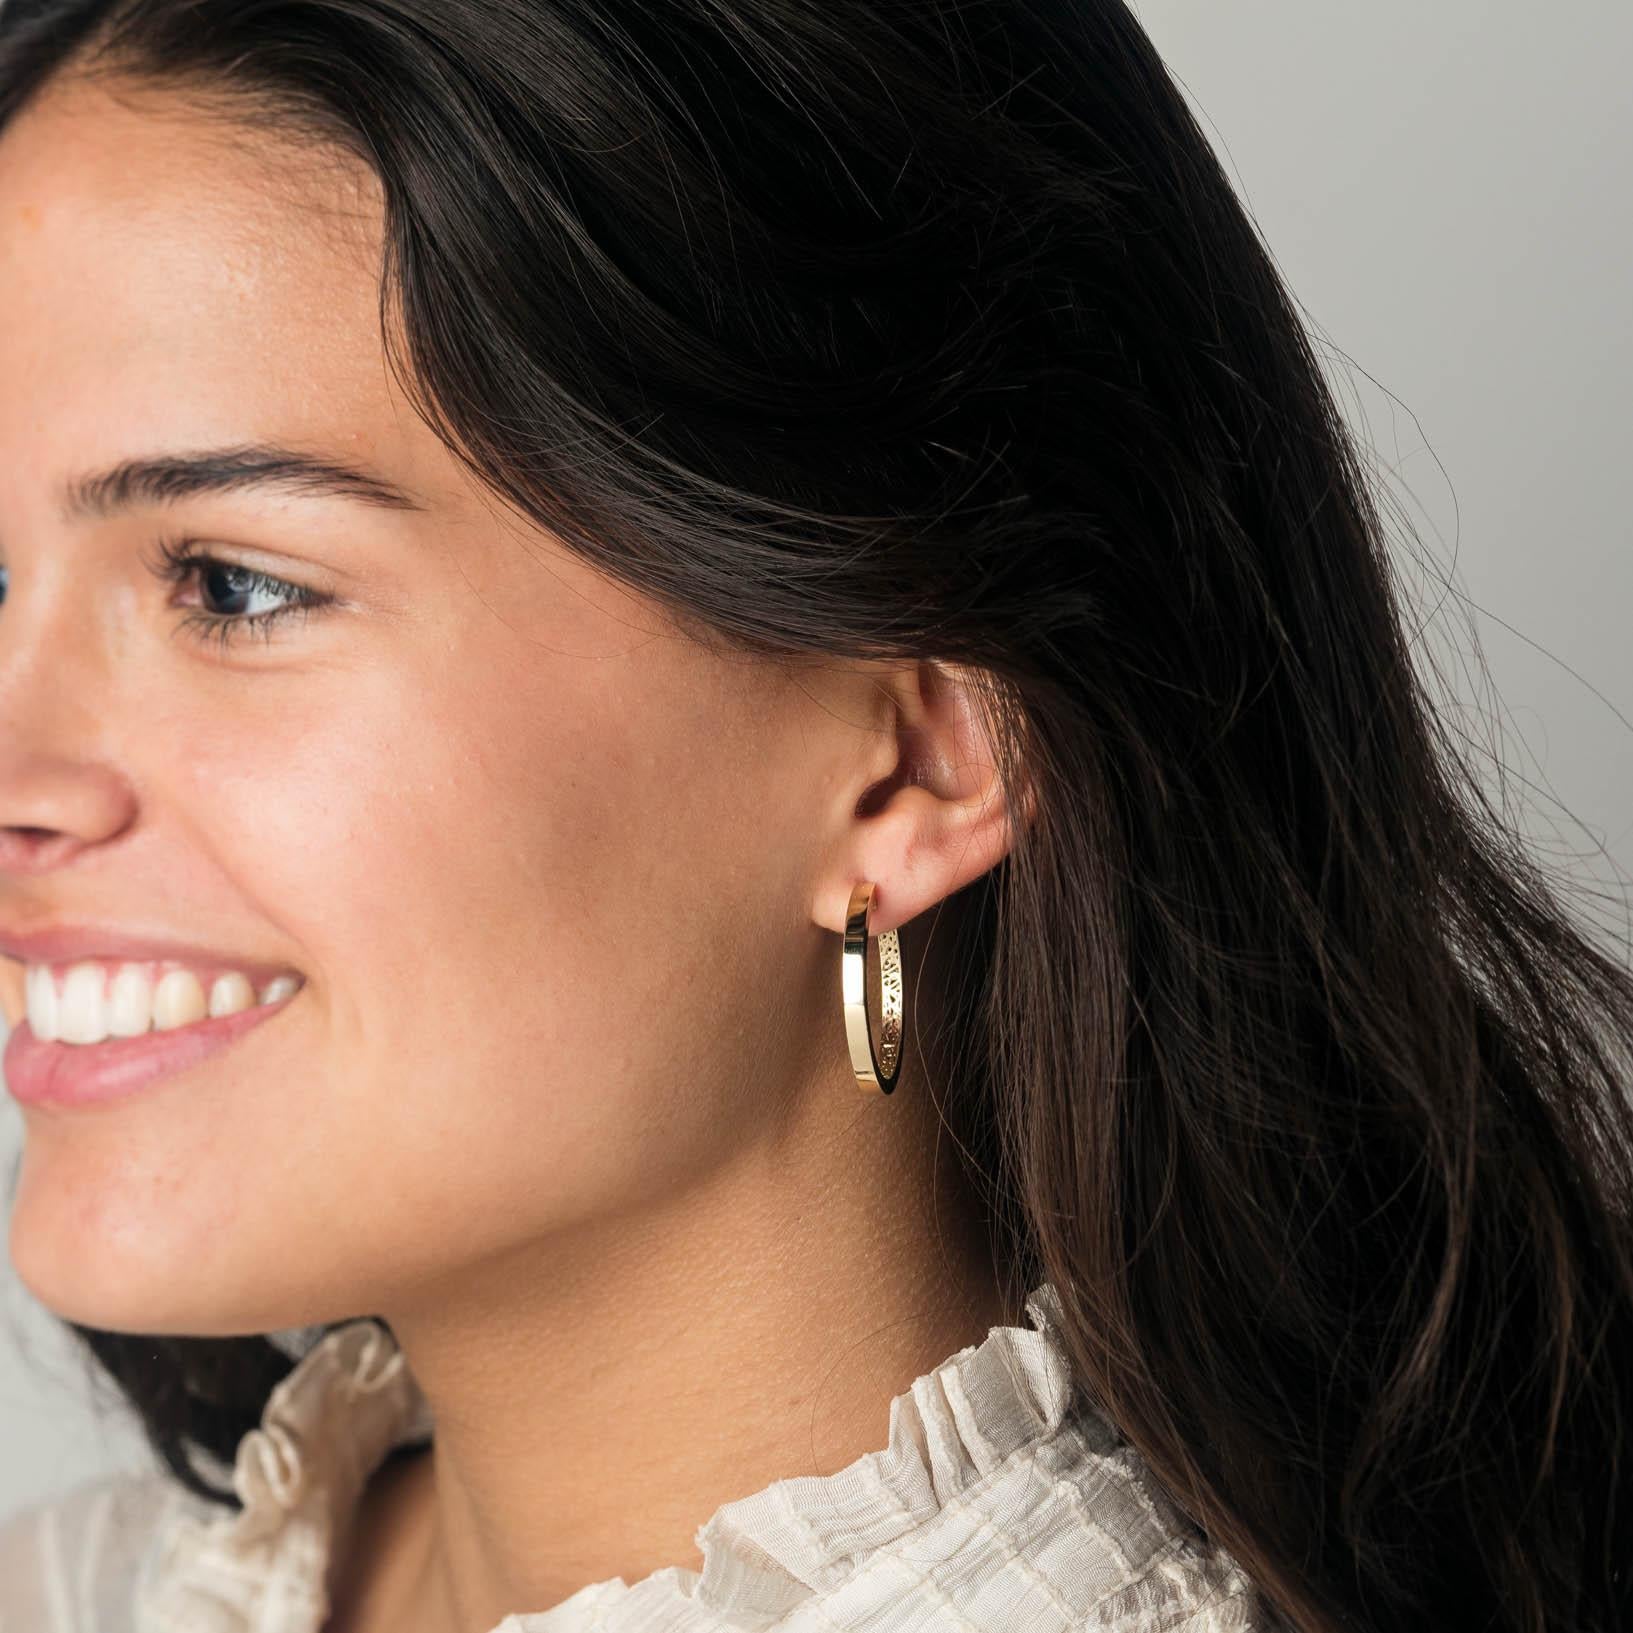 Discover the Beauty of 14K Yellow Gold Earrings from Cober Jewellery!
Enhance your style with our exquisite collection of 14K yellow gold earrings, featuring a playful lining on the inner side. Whether you're attending a special occasion or looking